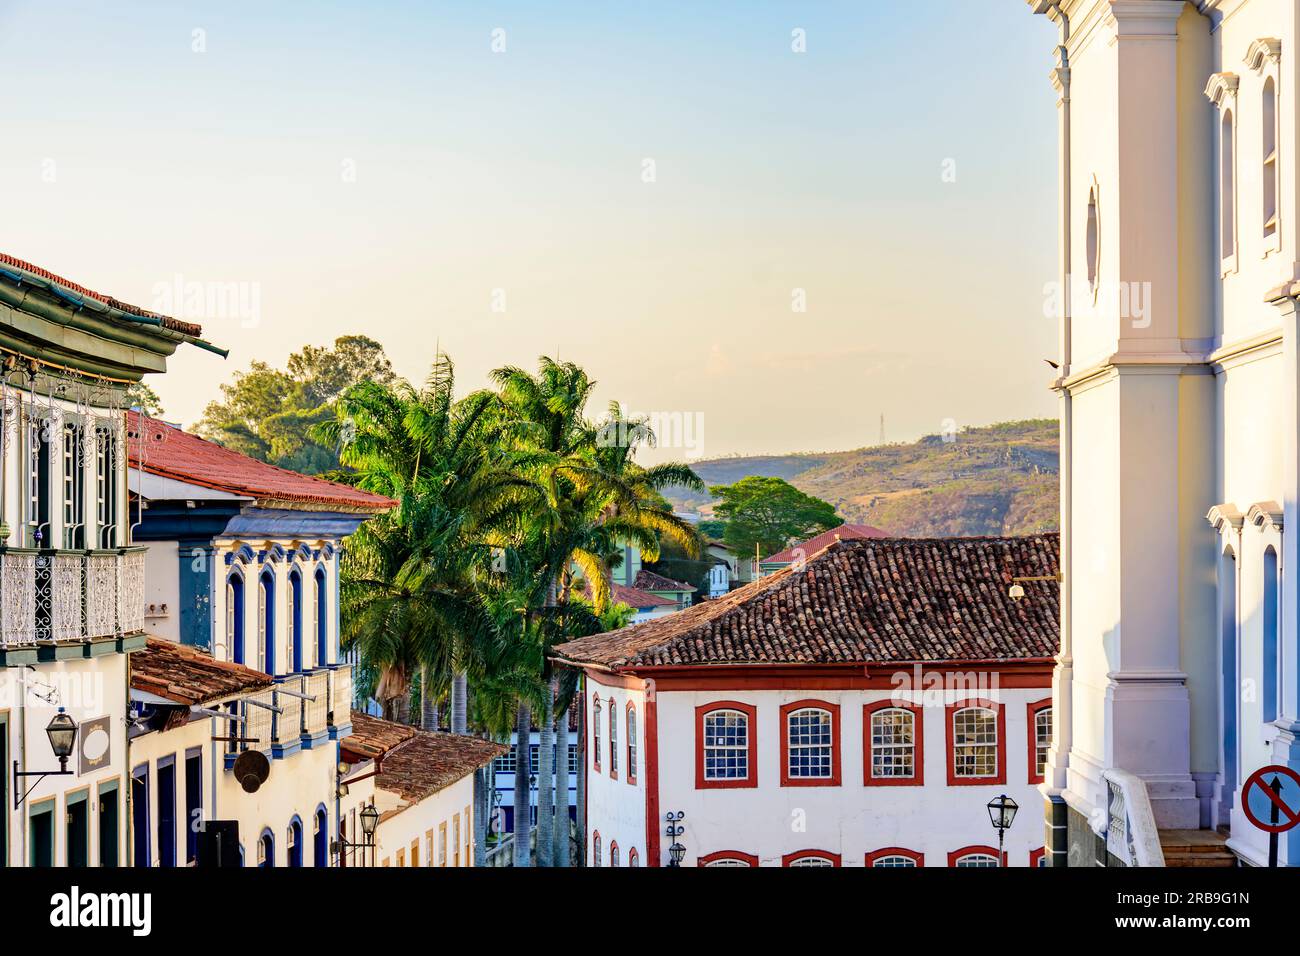 Historic center of the city of Diamantina with its colonial-style houses , hill and palm trees Stock Photo